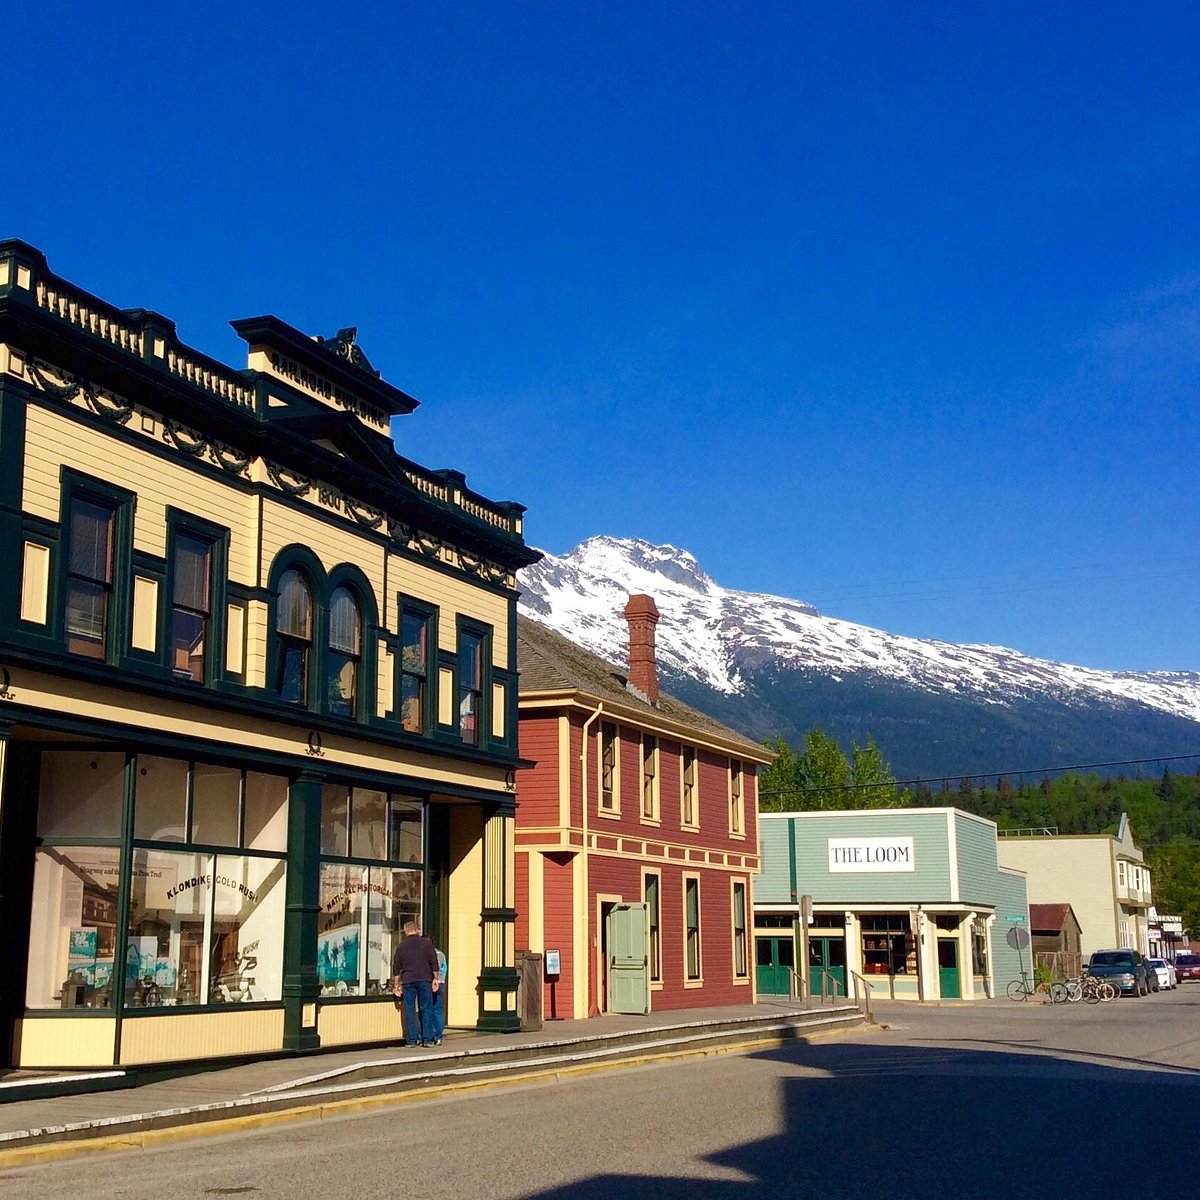 STATE STREET AND BROADWAY STREET (Skagway) All You Need to Know